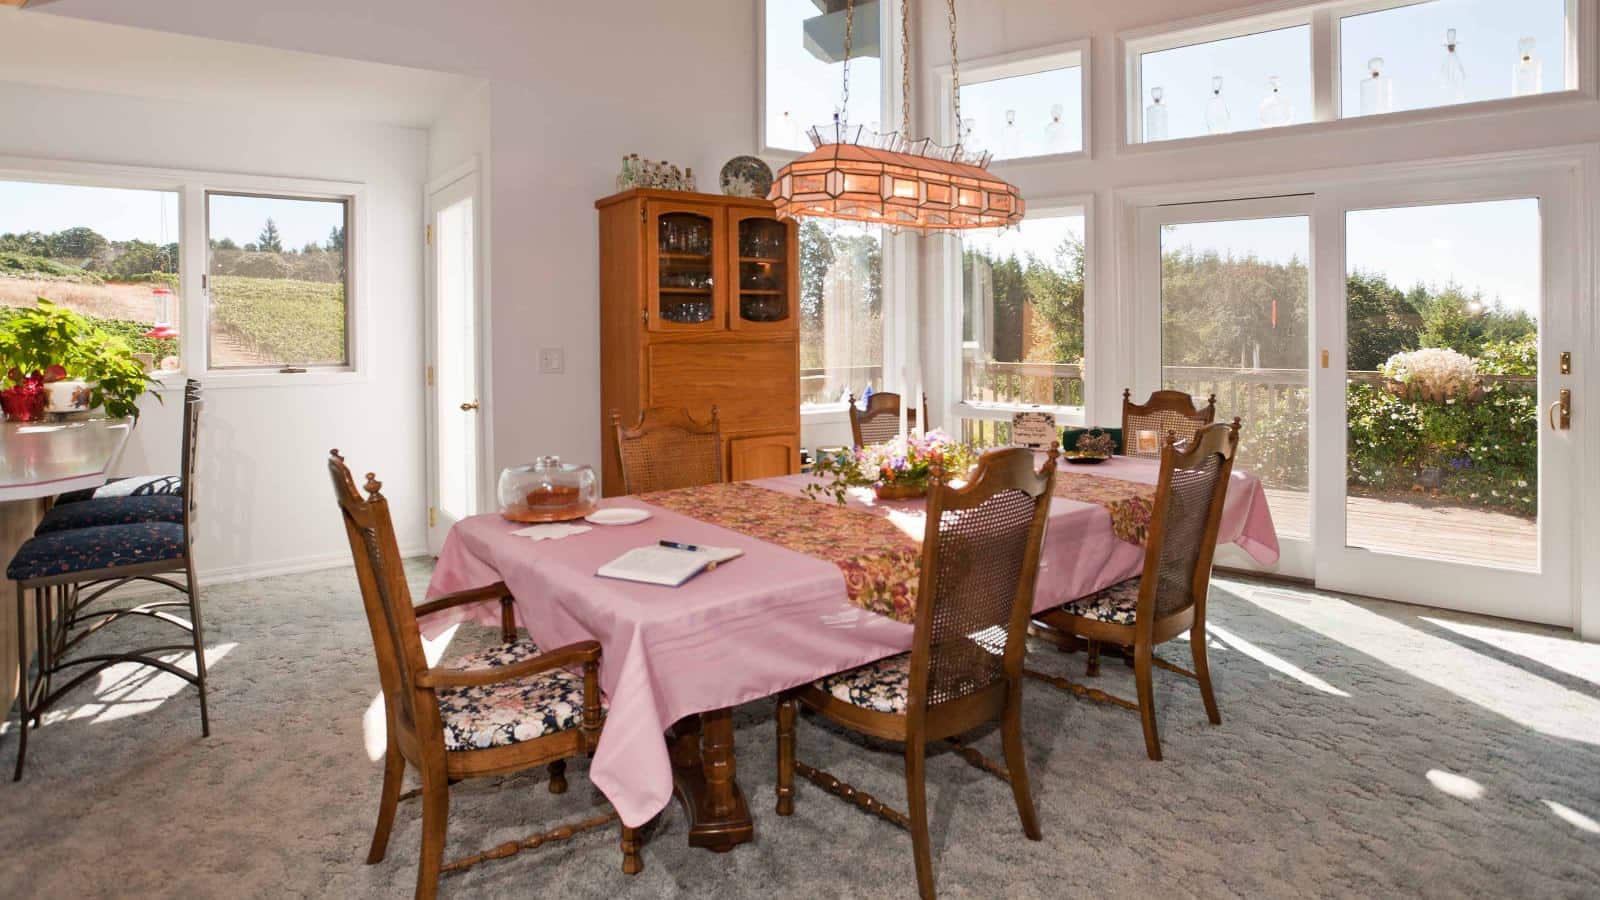 Dining room with white walls, carpeting, wooden table with pink tablecloth, wooden chairs, wooden china hutch, and many windows with views of the outside